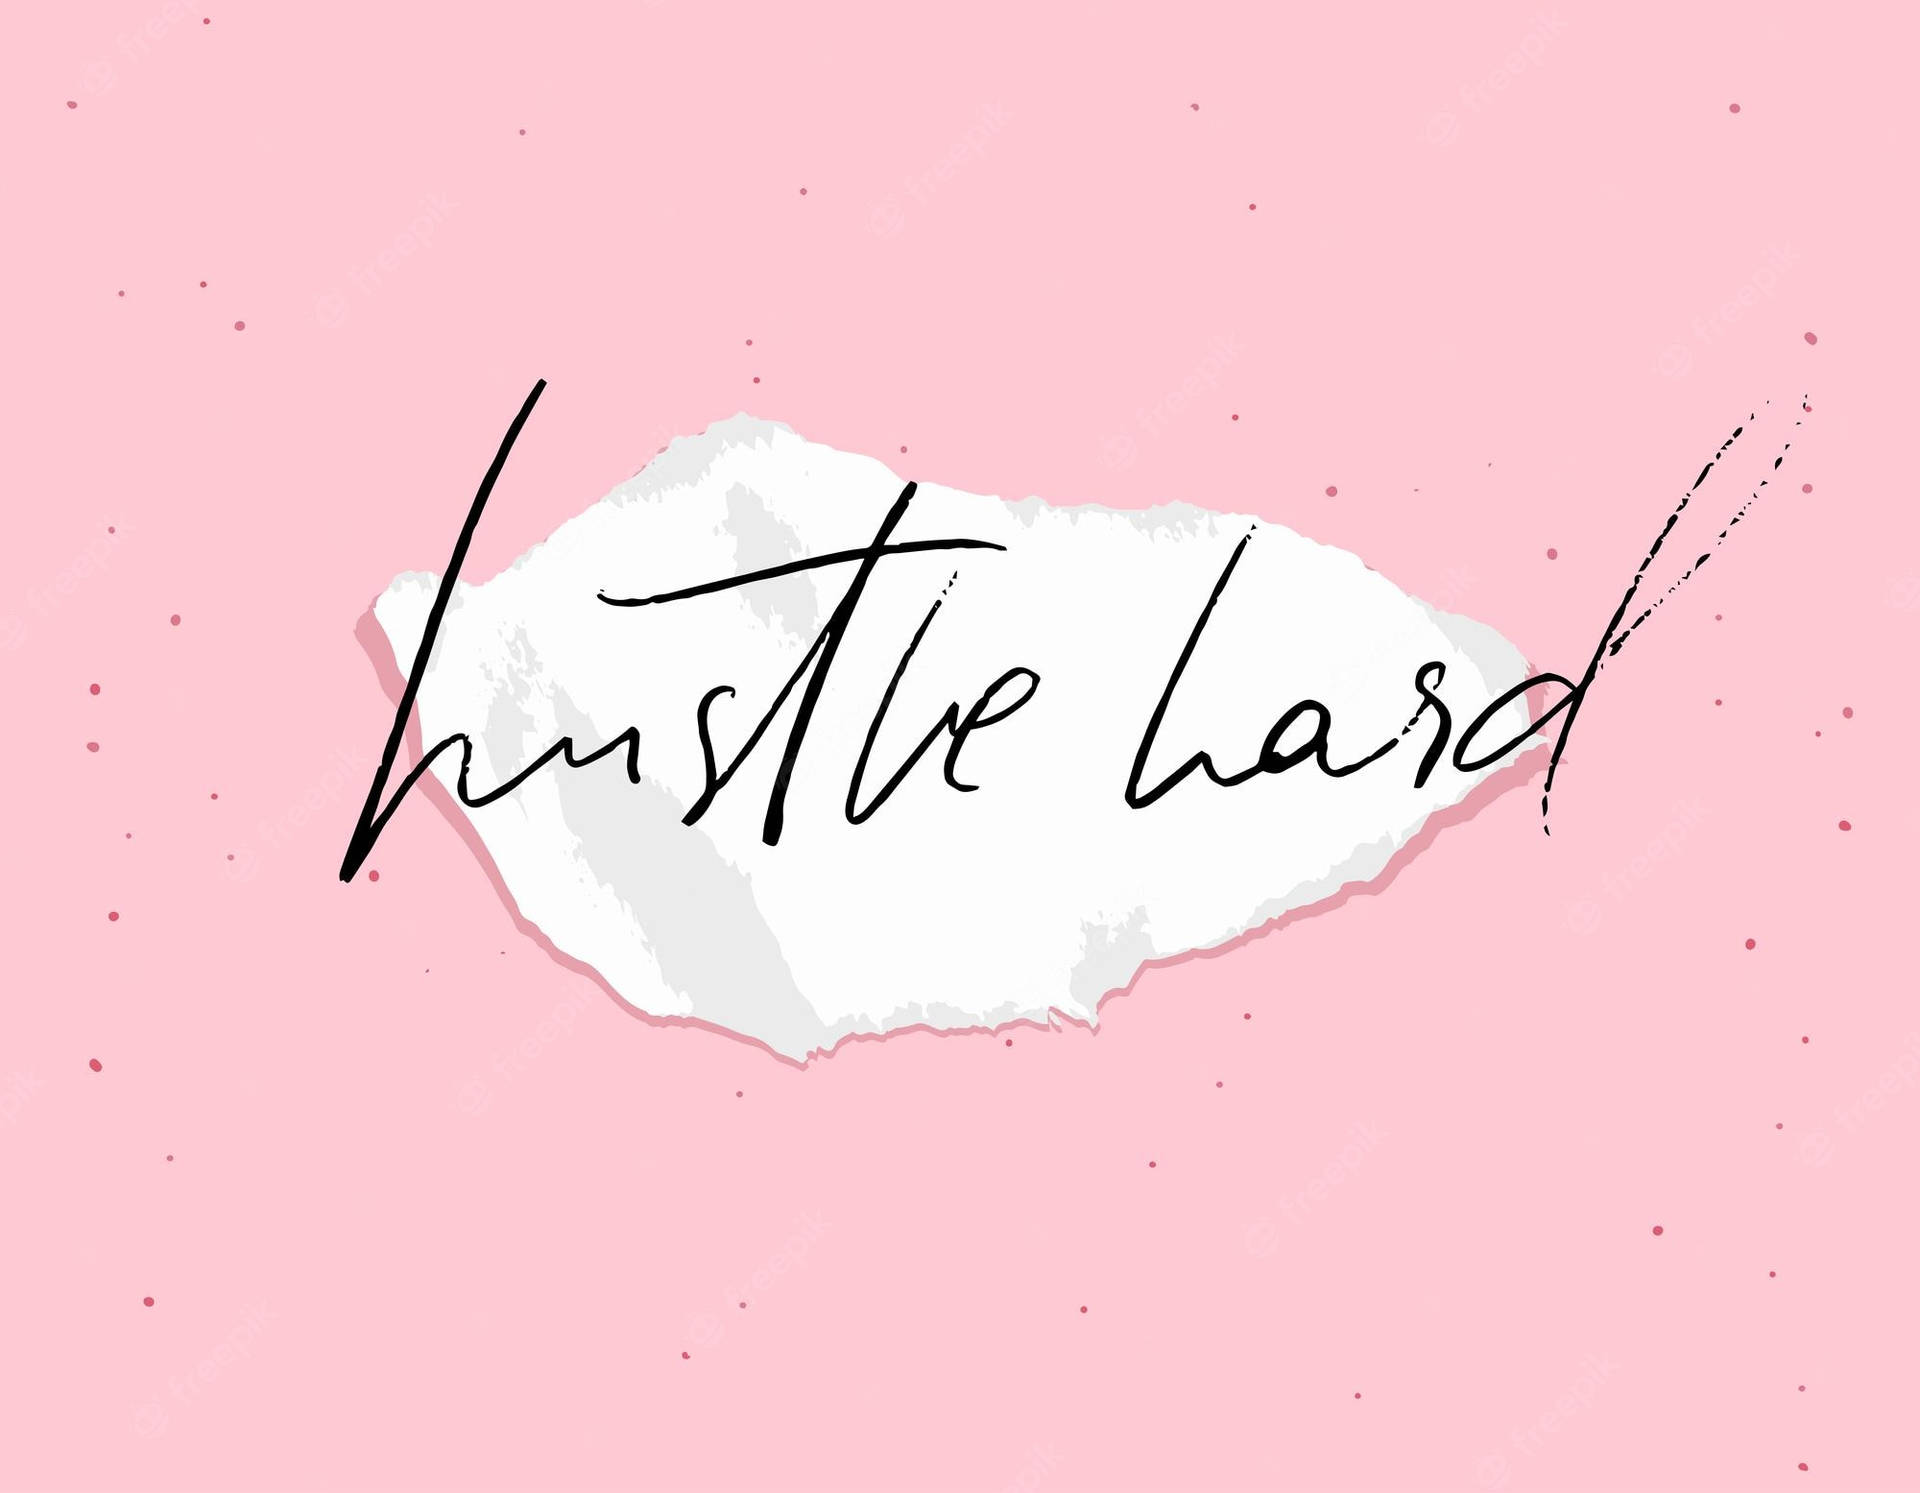 A Pink Background With The Word Hustle Land Wallpaper